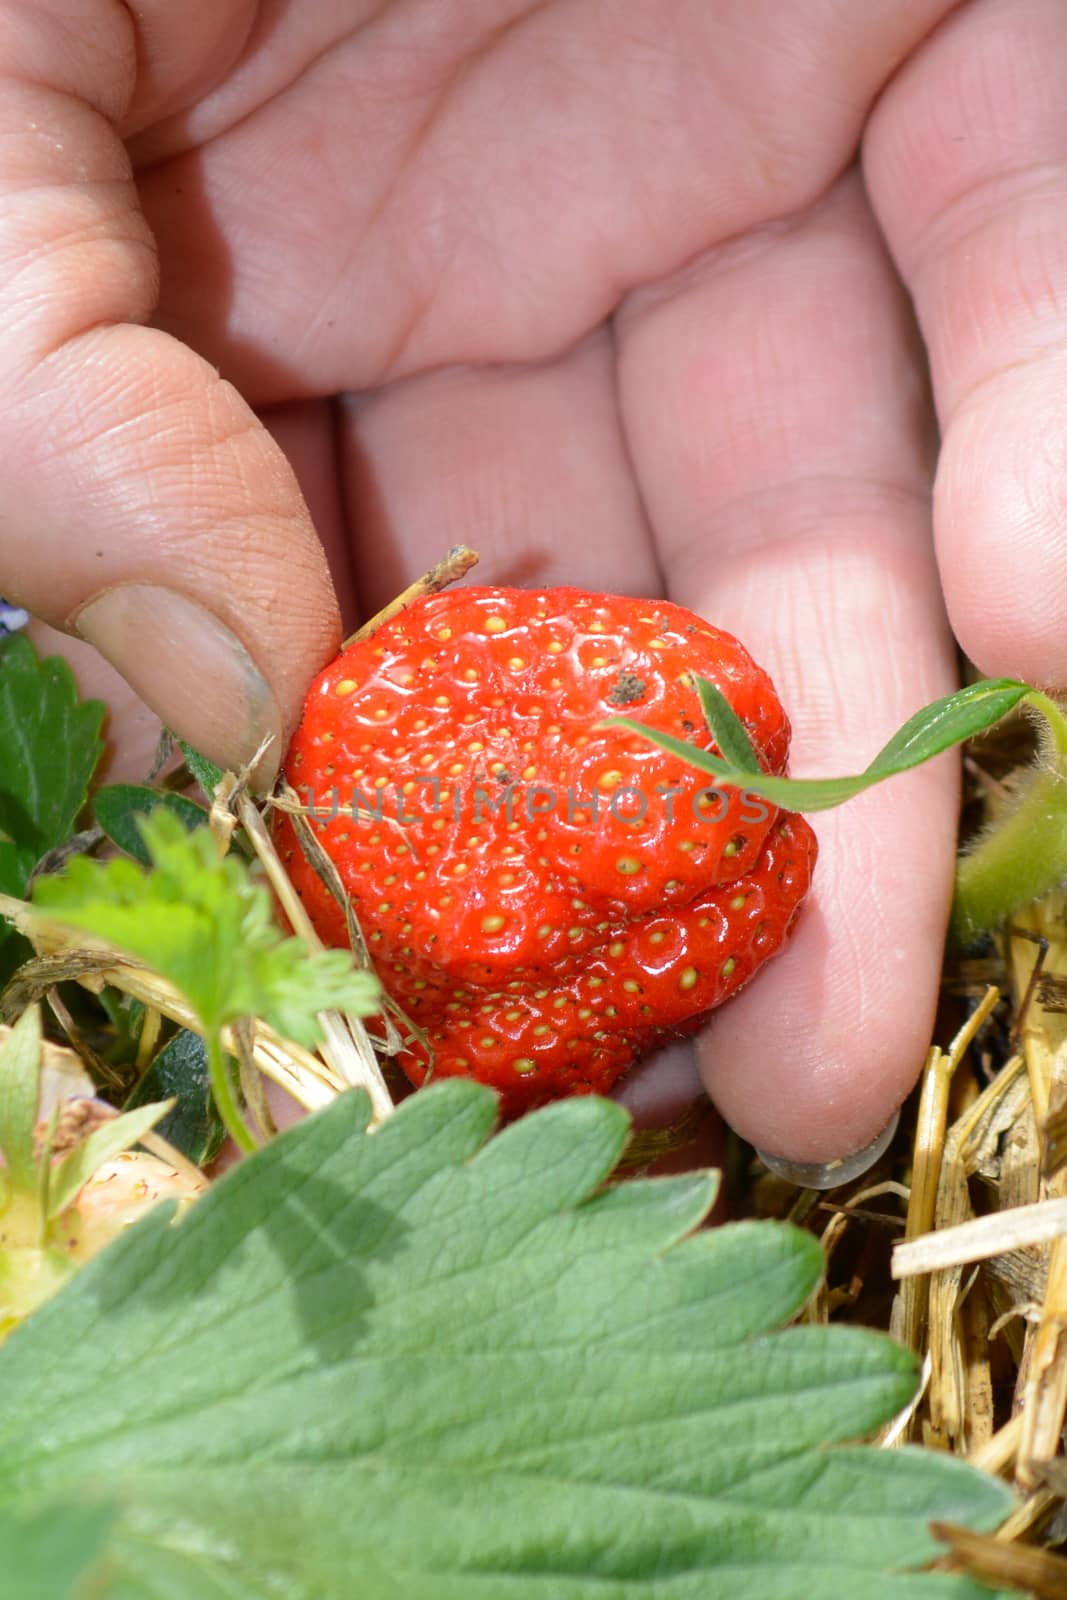 Picking up strawberry from field